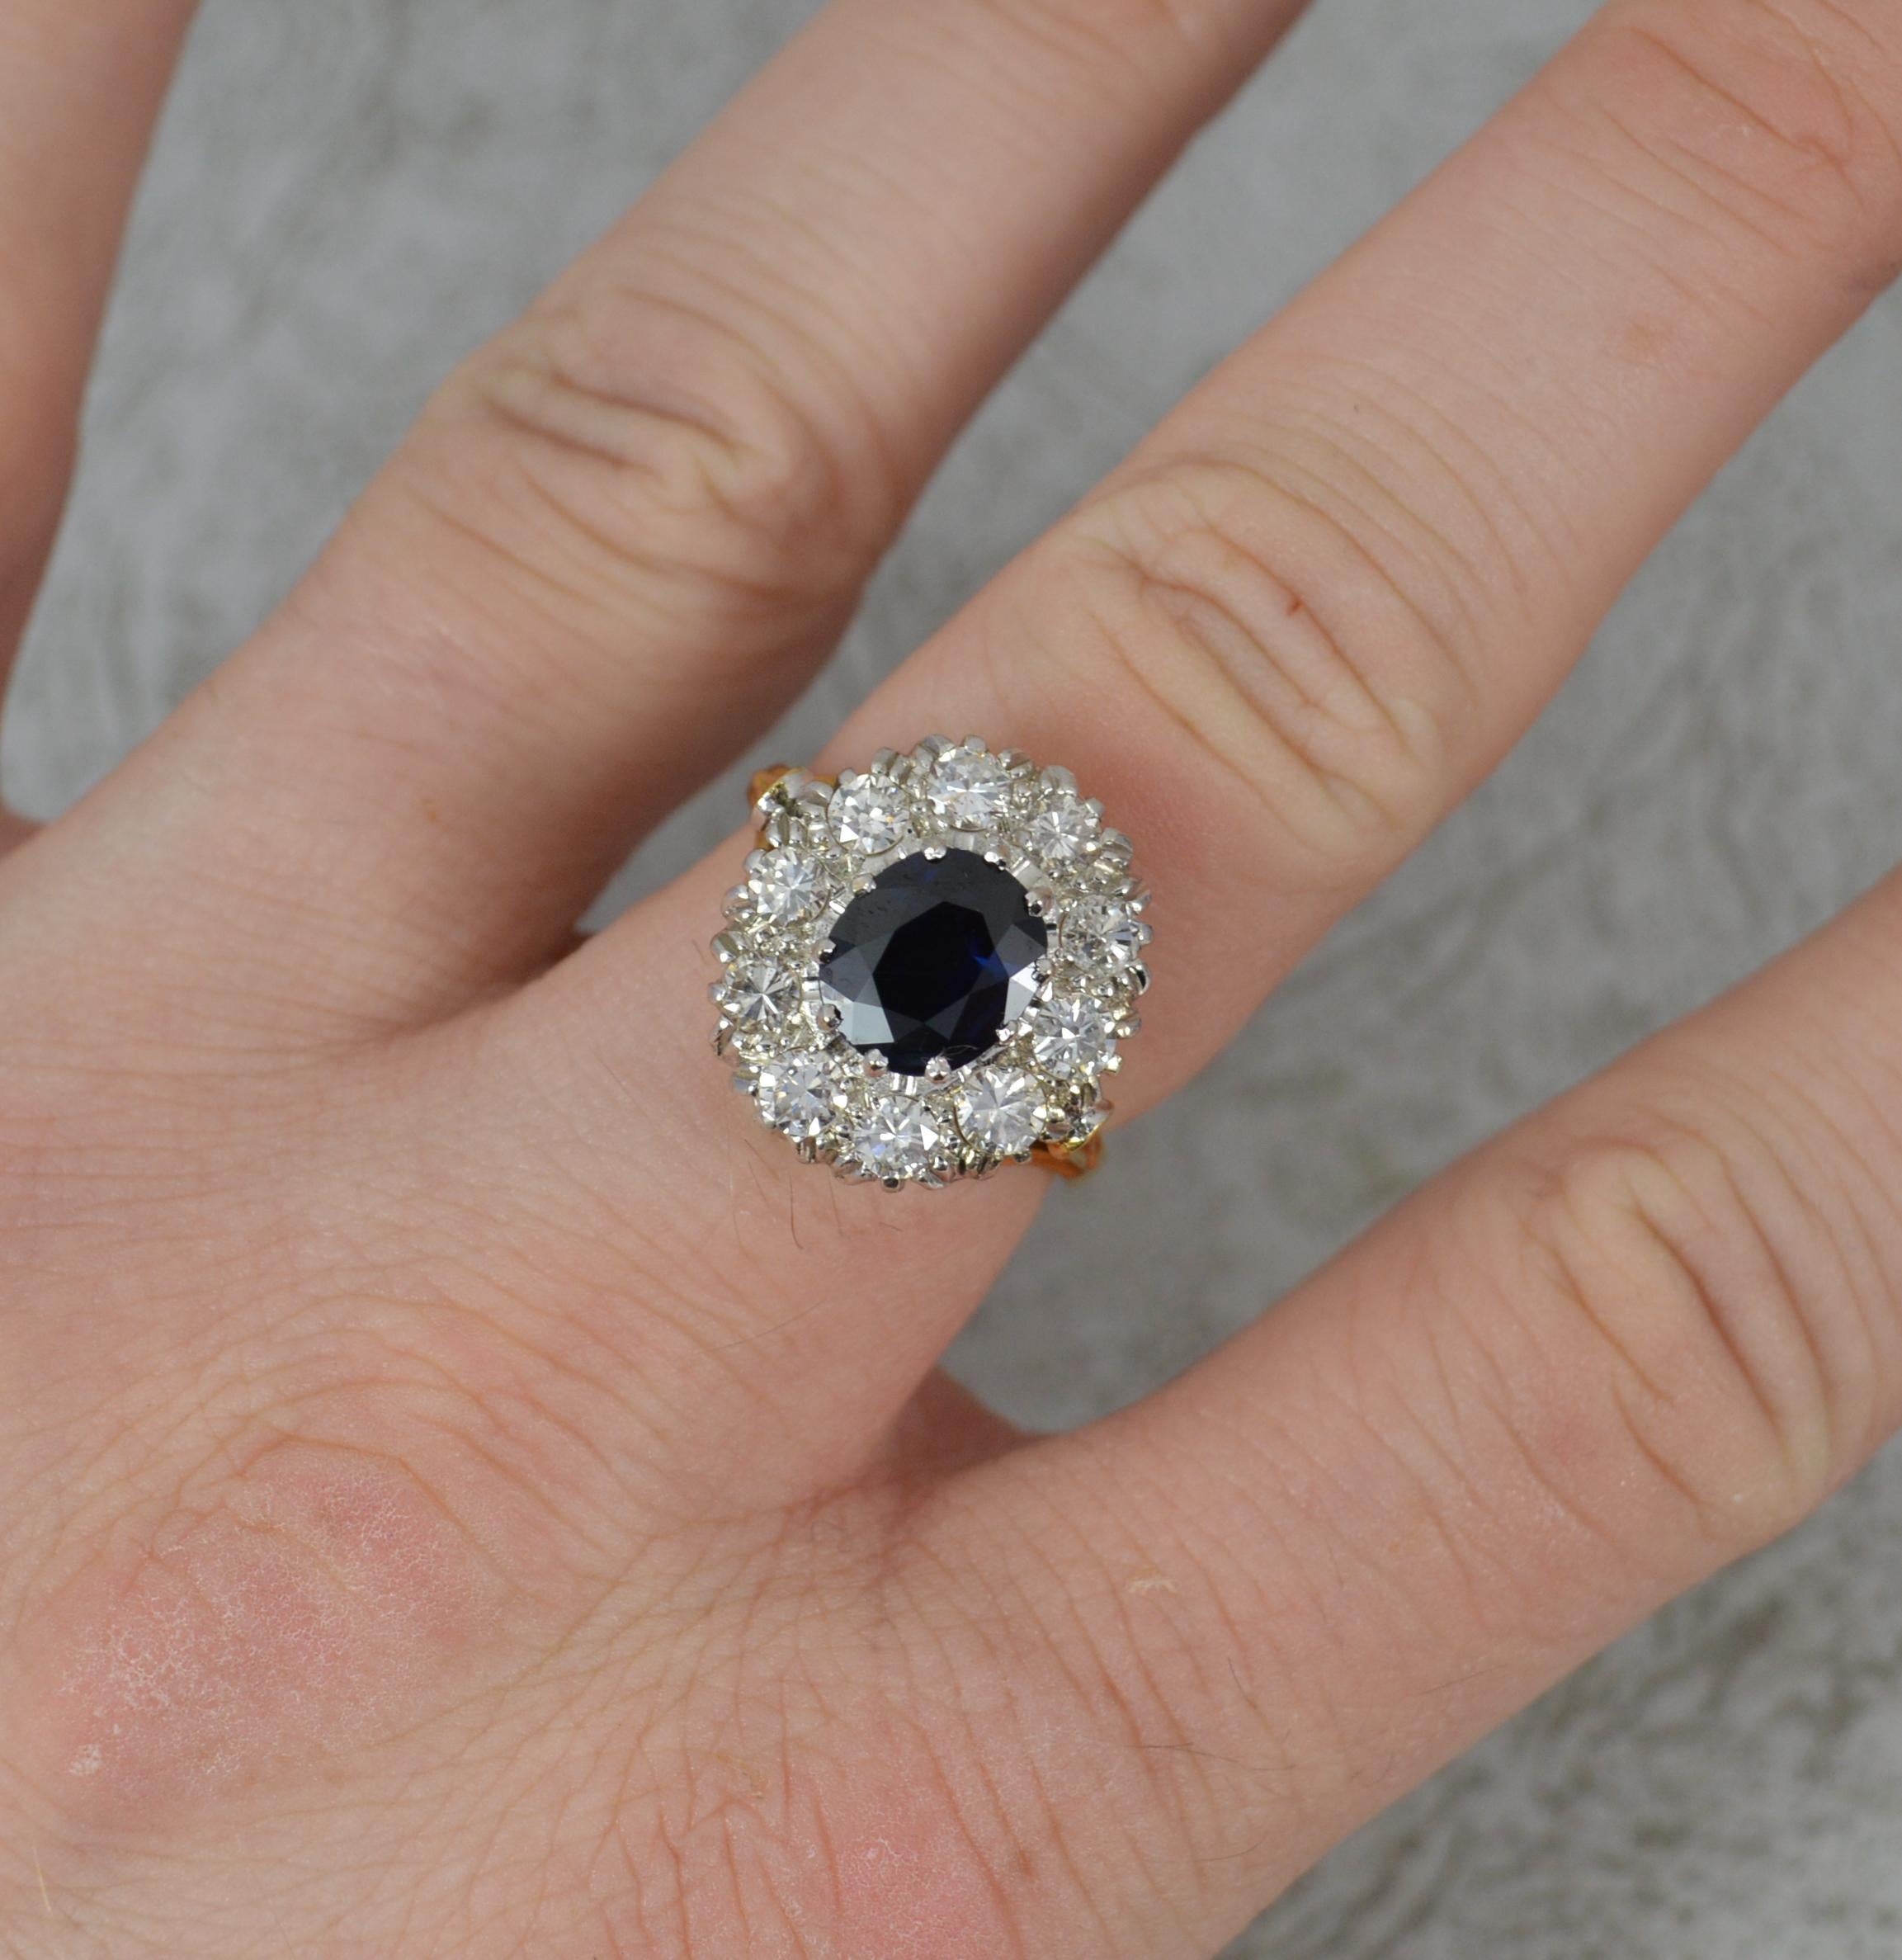 A beautiful Sapphire and Diamond ring.
Solid 18 carat yellow gold shank and platinum head setting.
Designed with a natural dark blue sapphire to the centre, 7.1mm x 8.25mm in multi claw setting. Surrounding are ten natural round cut diamonds to